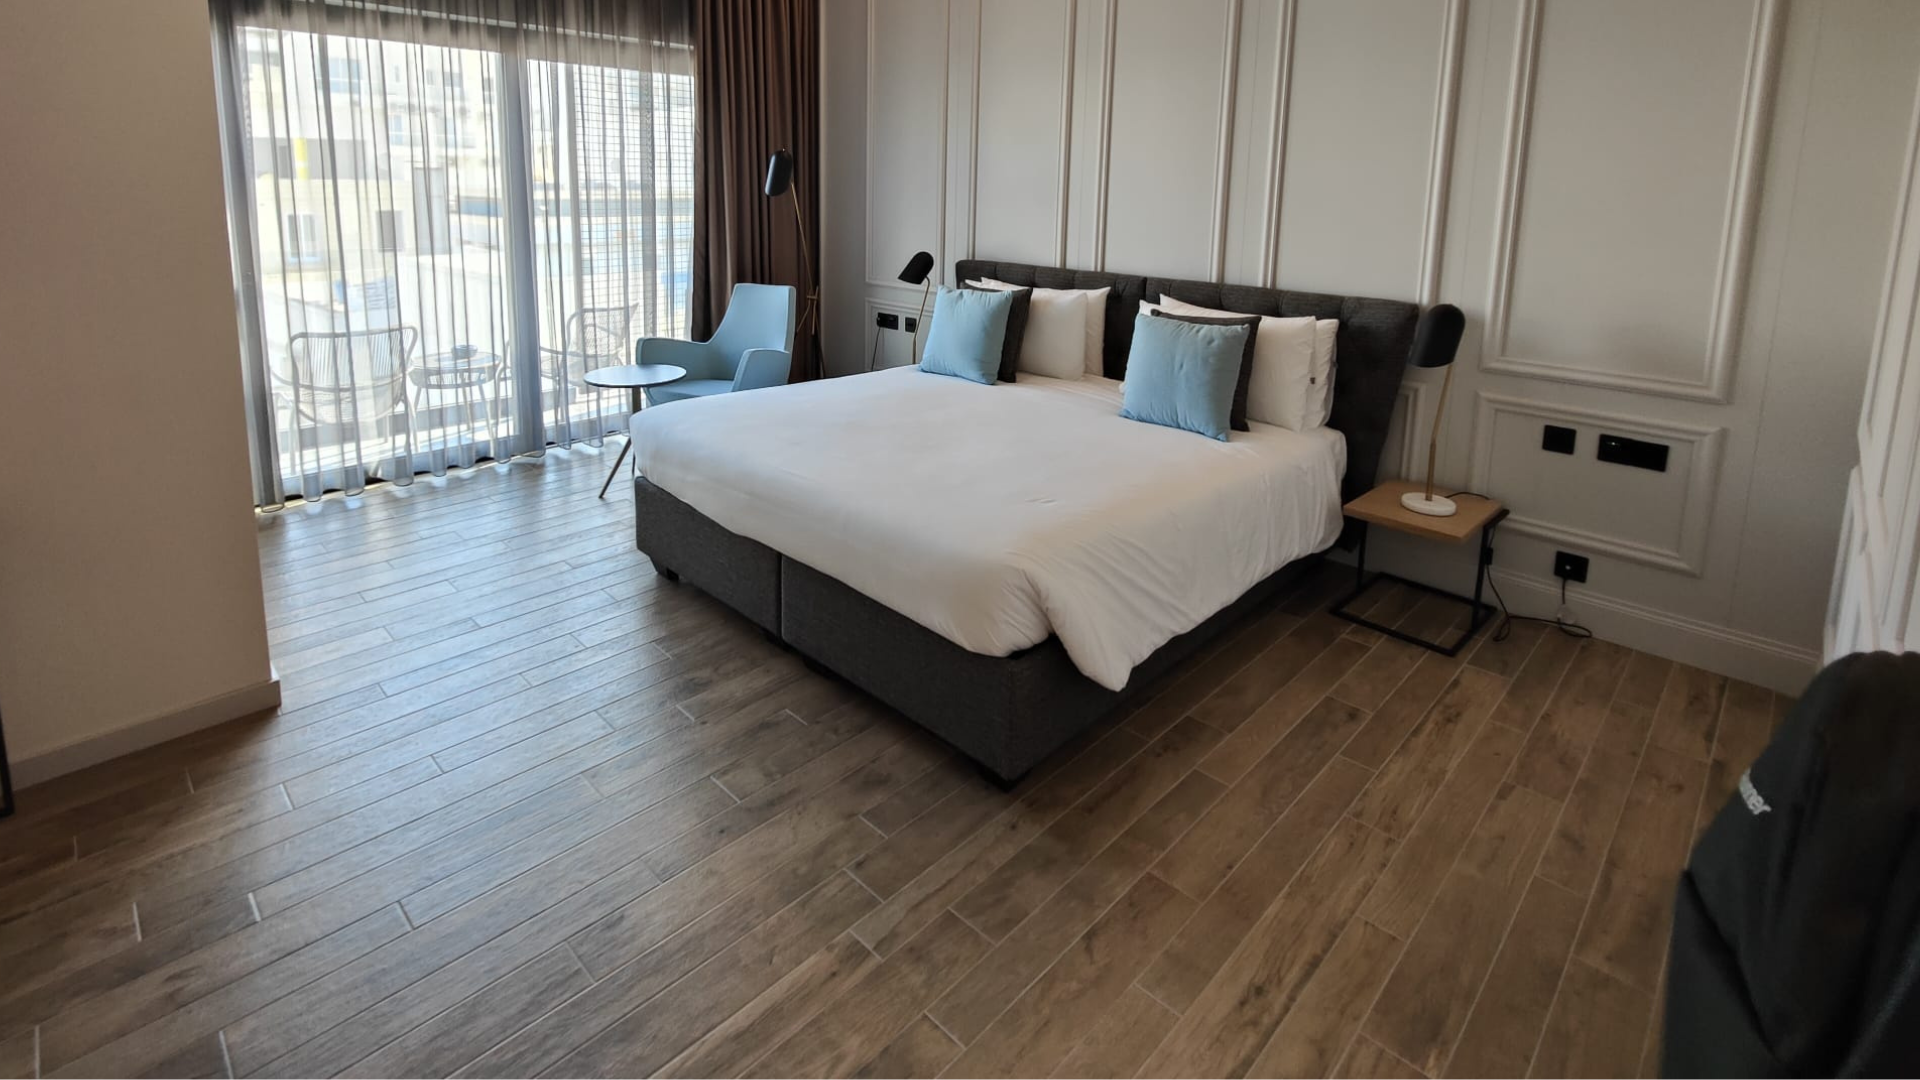 Land’s End Boutique Hotel – A Brand New Hotel In Malta